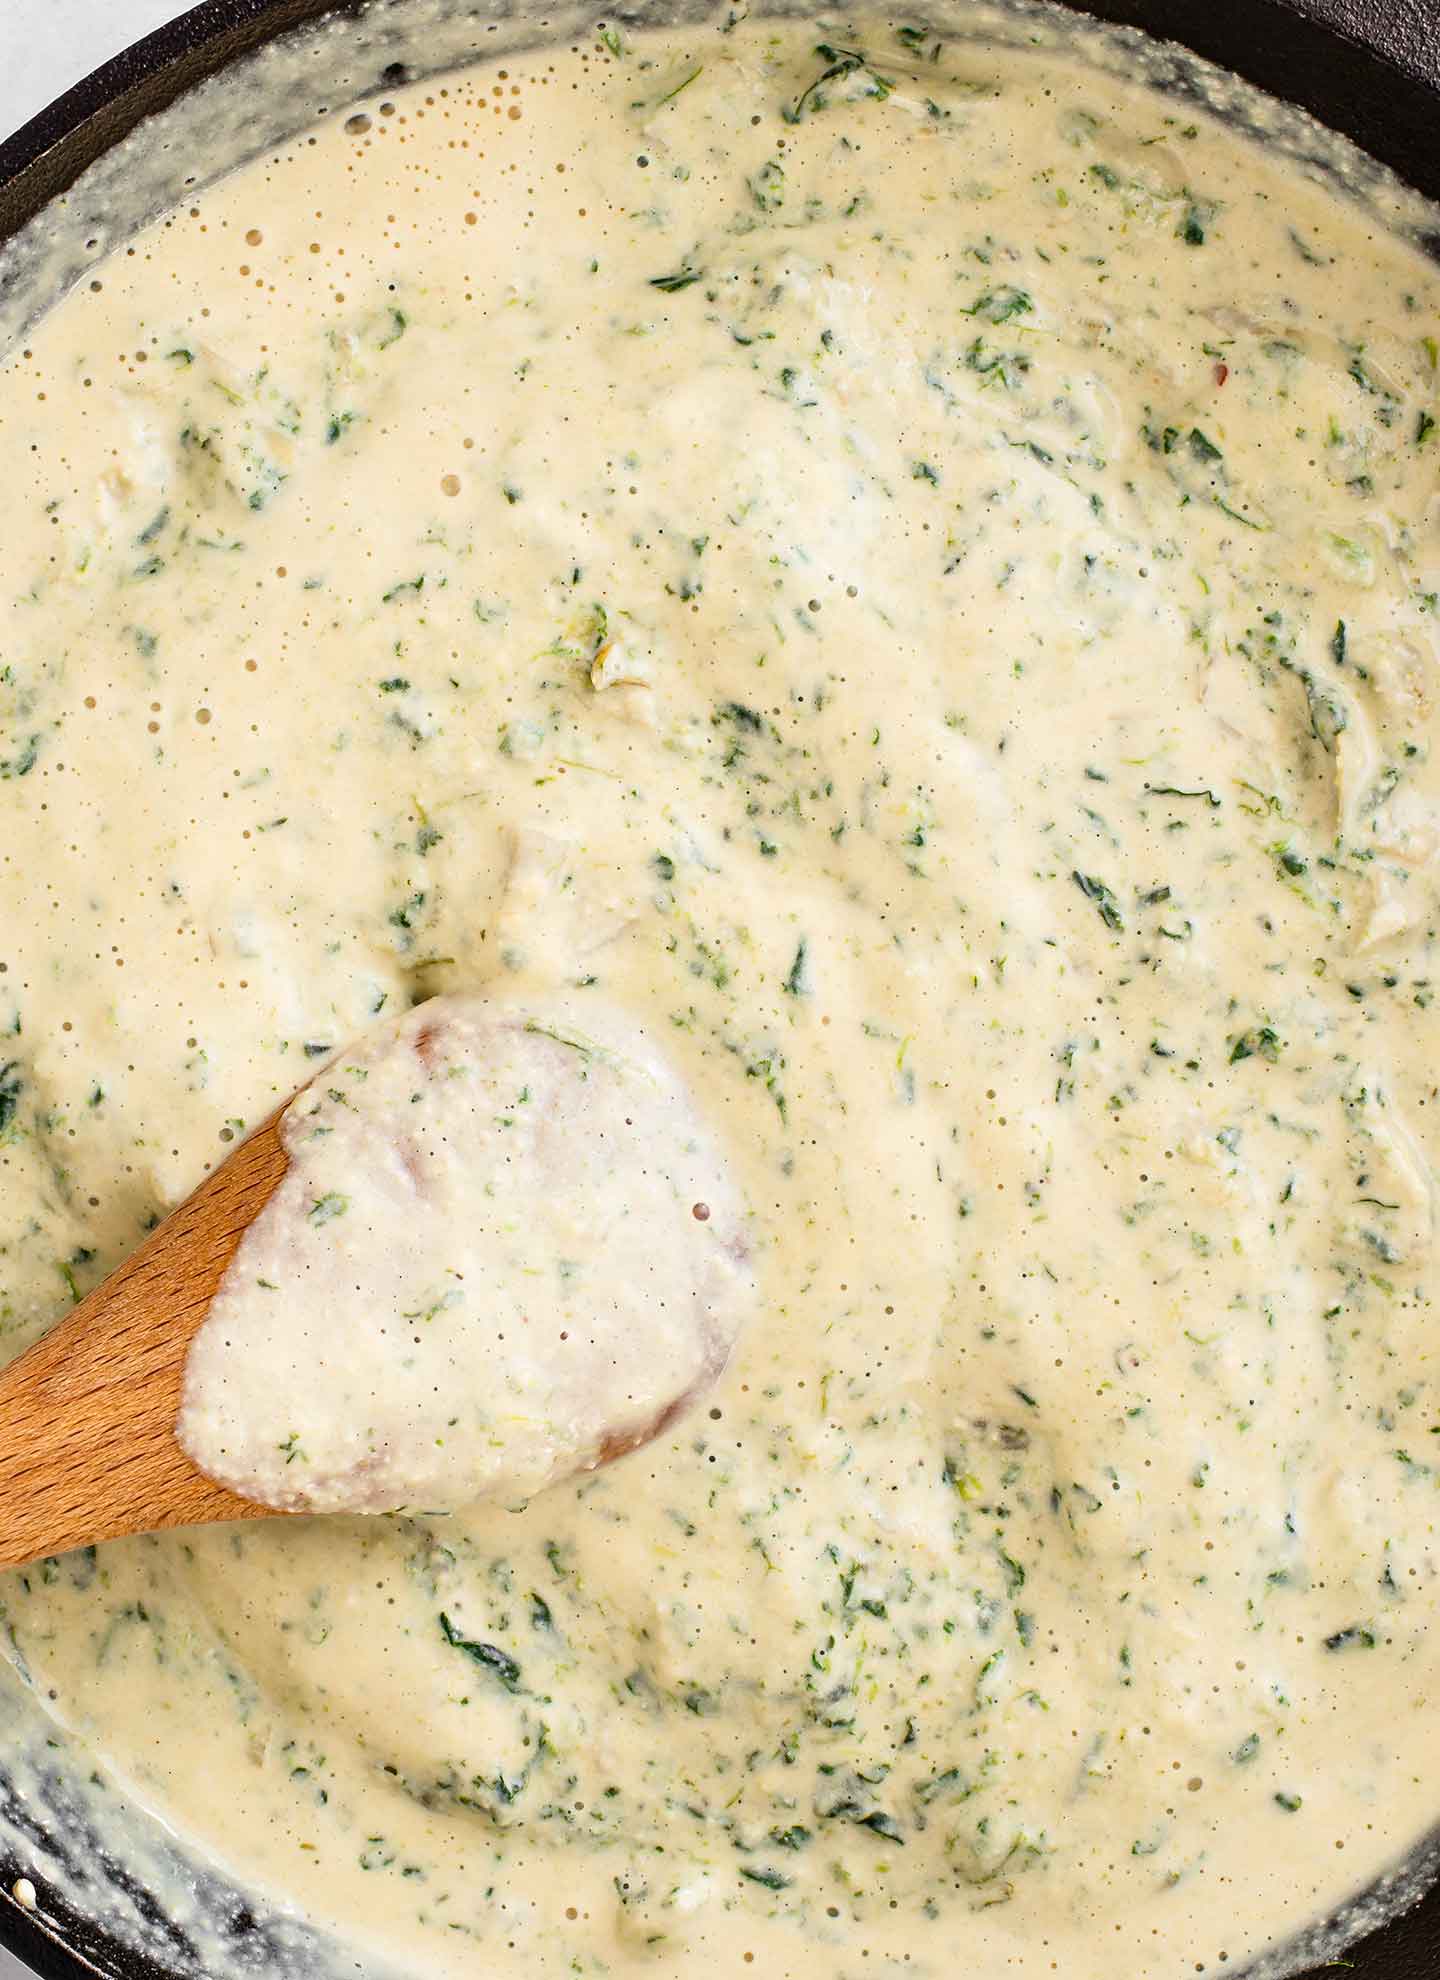 Top down view of the creamy dip before being warmed in the oven.